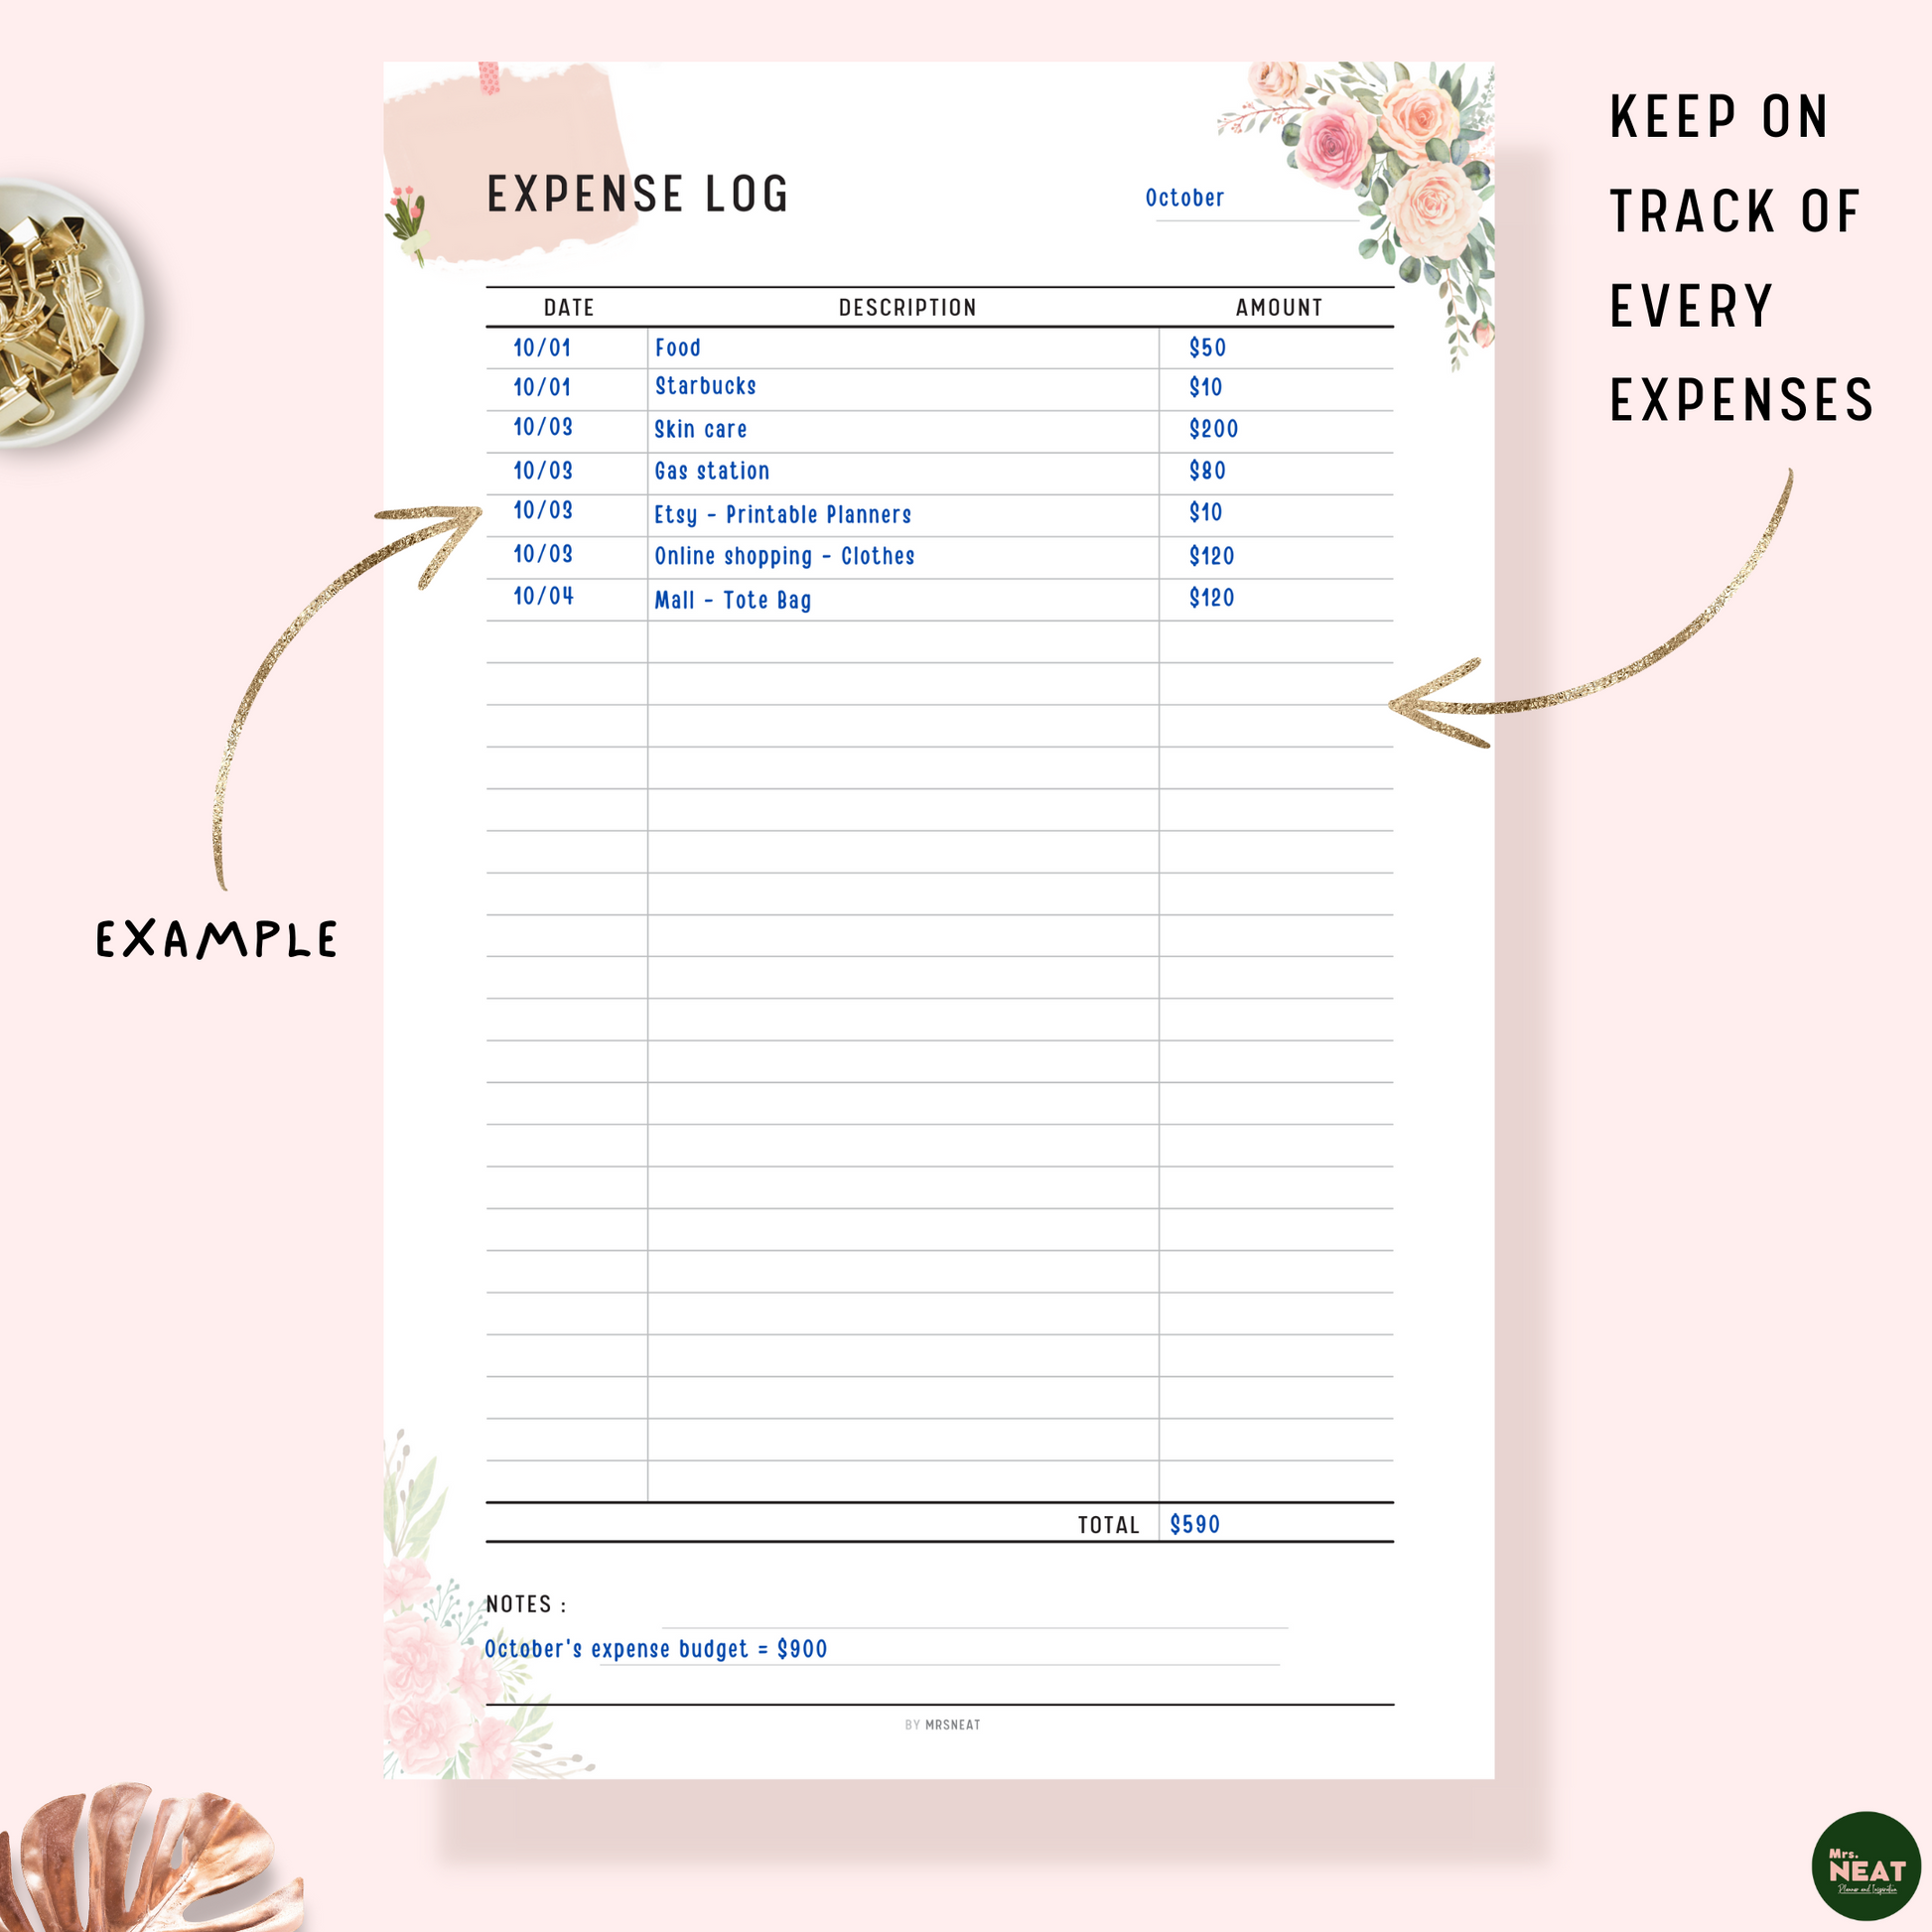 Floral Expense Log Tracker Printable Planner with detail list of expenses and notes